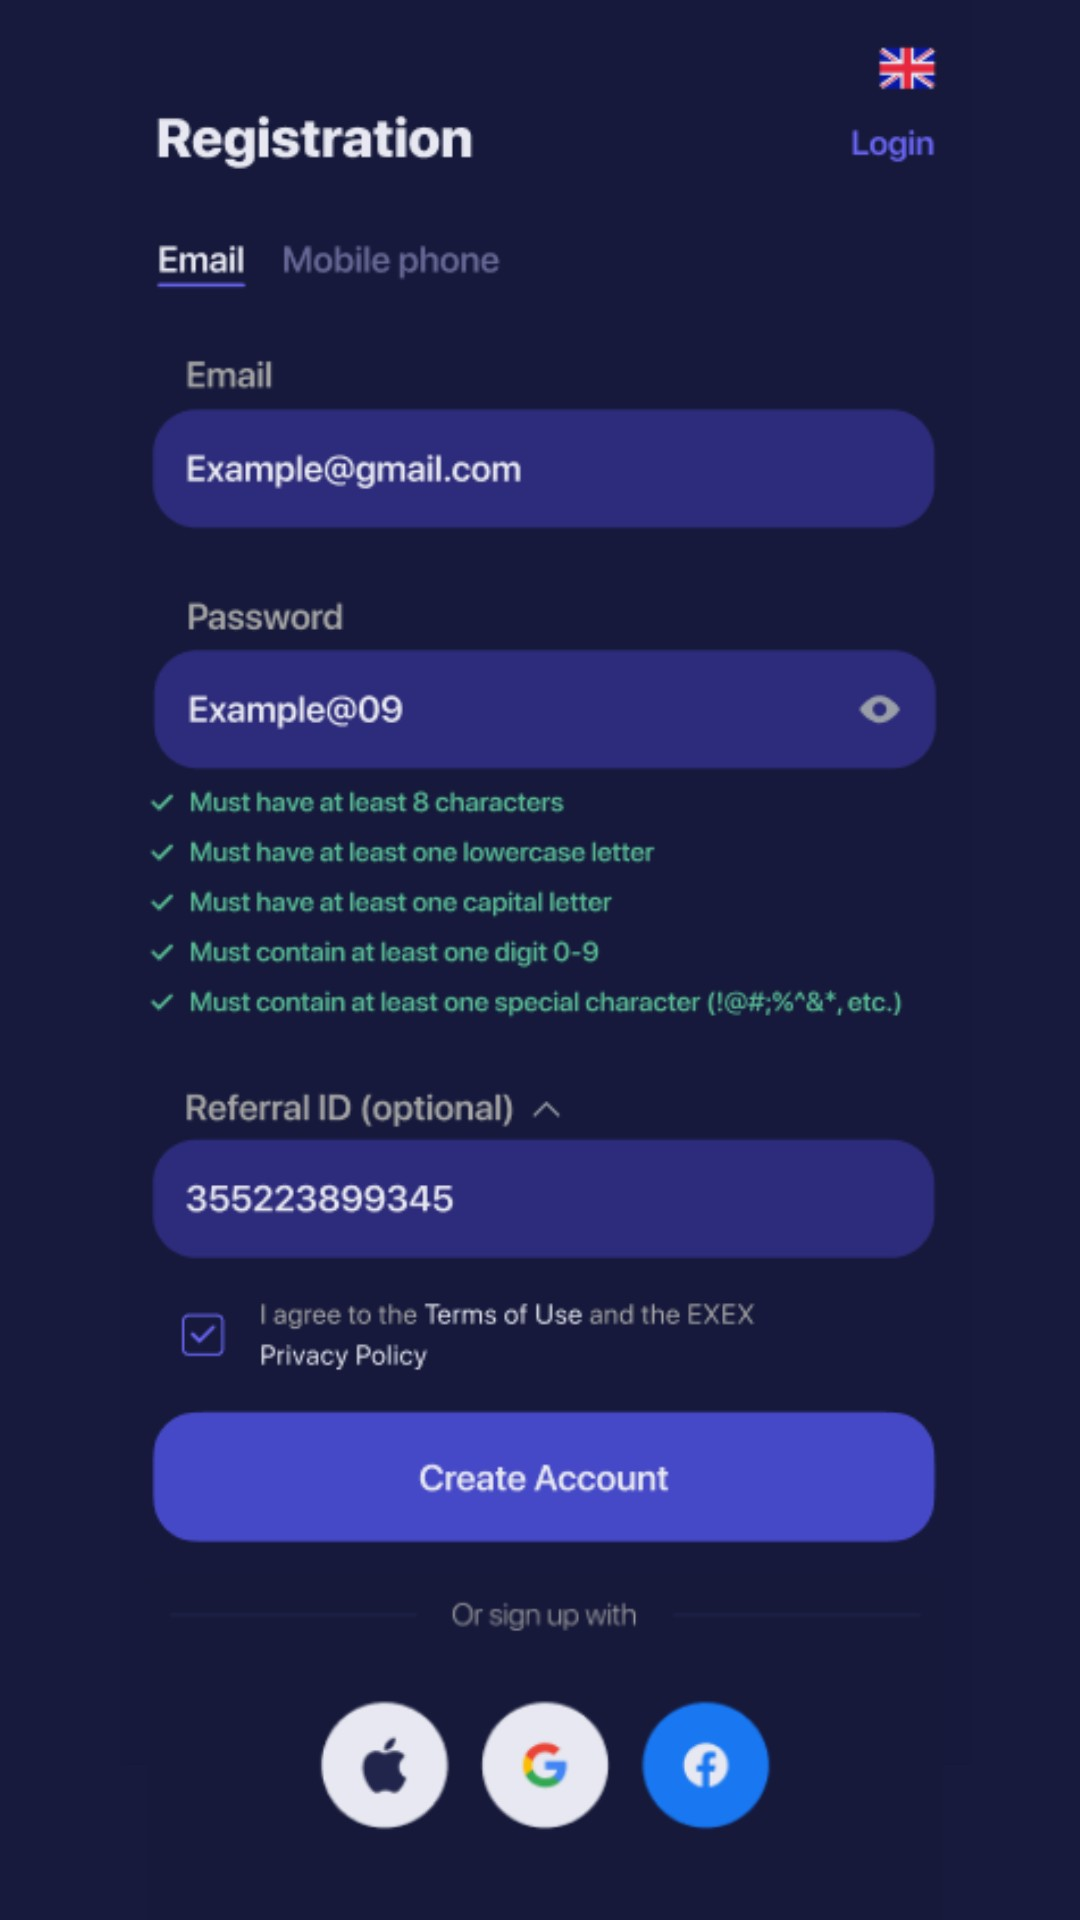 How to register on EXEX via e-mail